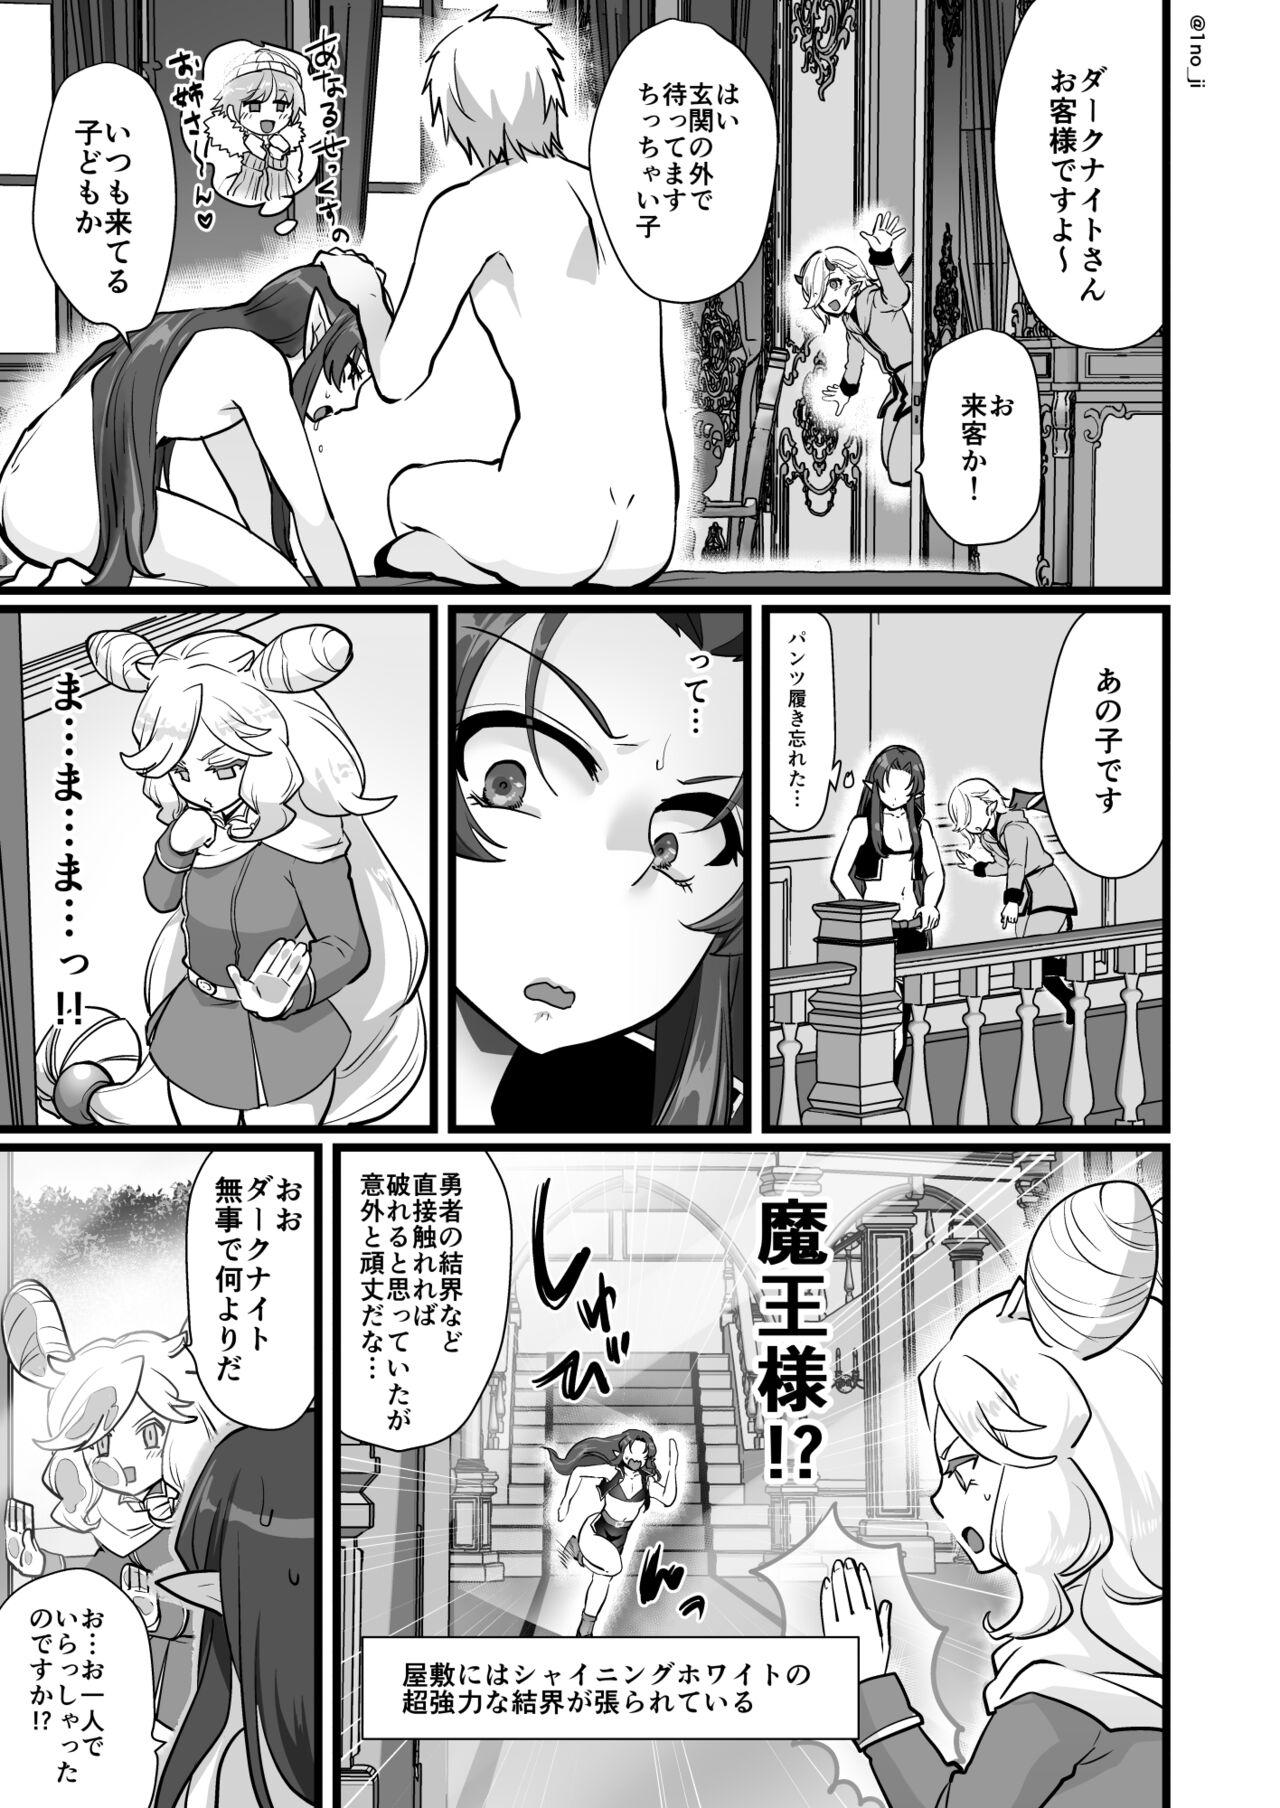 Couch 魔王軍の元幹部♂が勇者に負けてメスにされる話2【ダークナイトさんシリーズ】 - Original Groping - Page 8